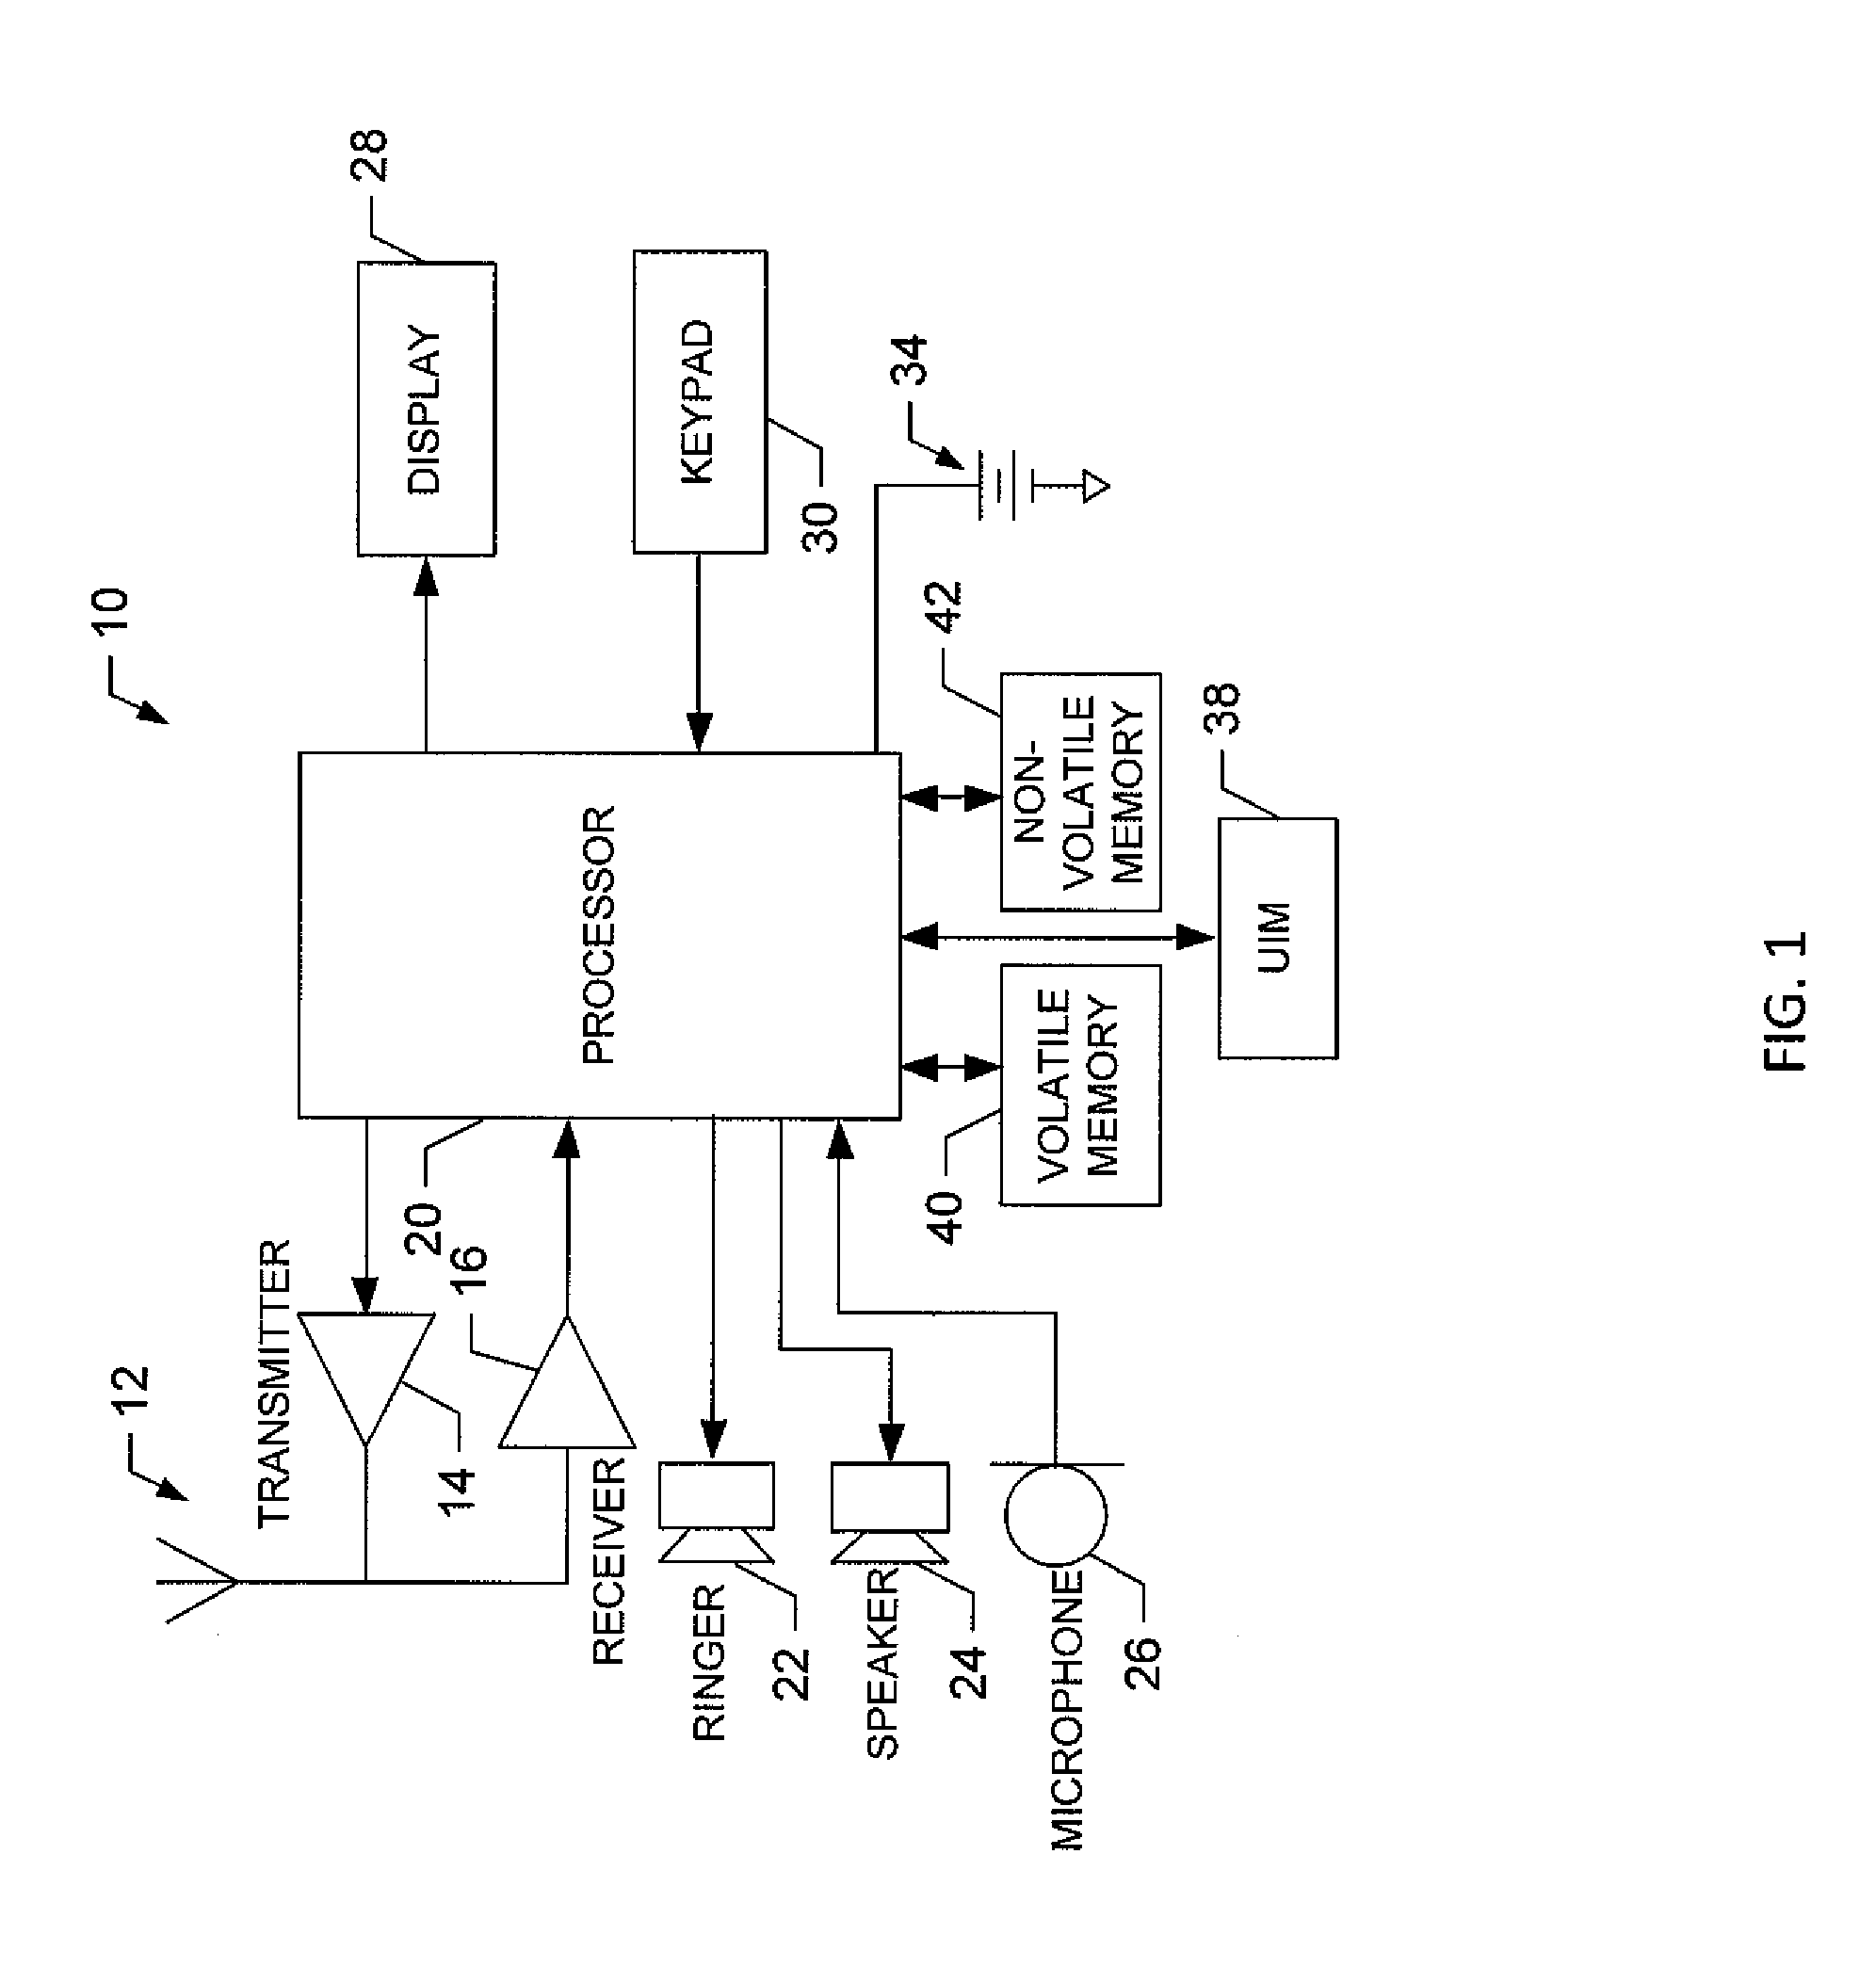 Method, apparatus and computer program product for displaying items on multiple floors in multi-level maps